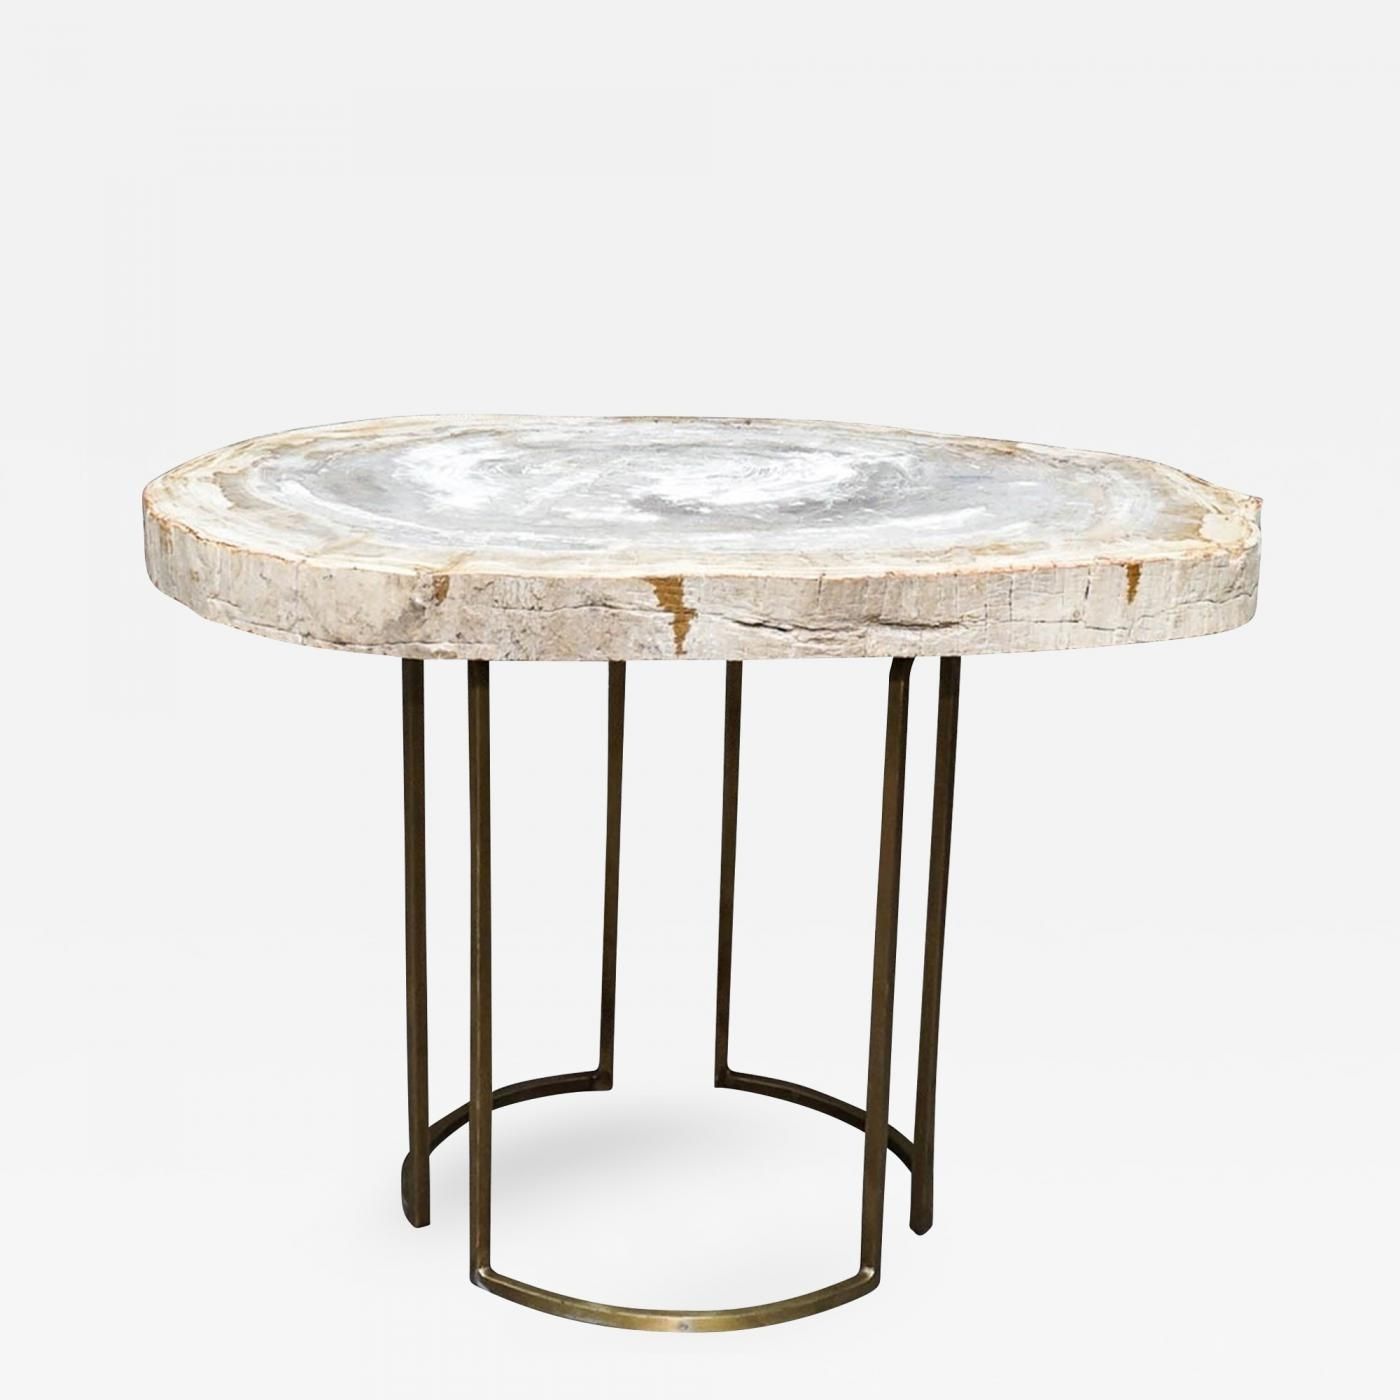 Custom Petrified Wood Slab Accent Table With Brass Base Intended For Slab Large Marble Coffee Tables With Brass Base (View 4 of 30)